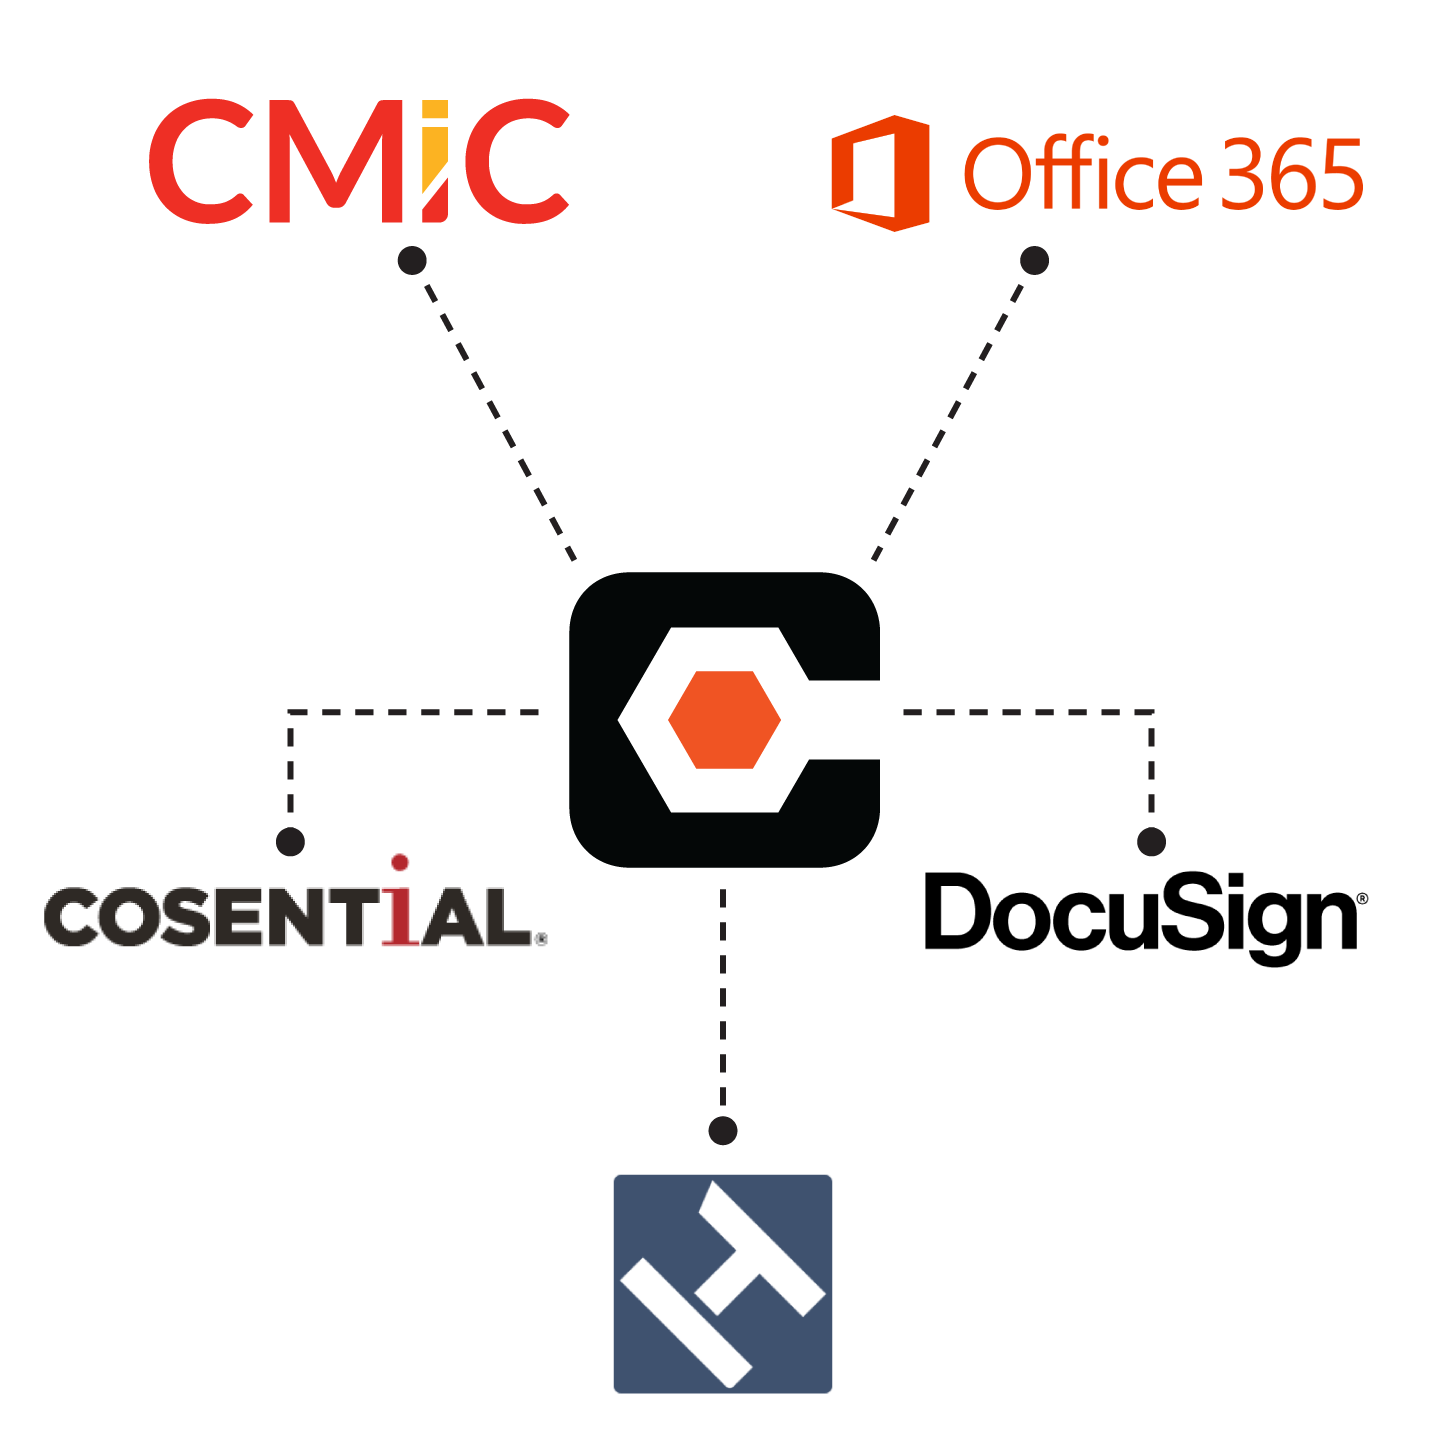 Procore linked to integrations: CMIC, Office 365, Cosential and Docusign